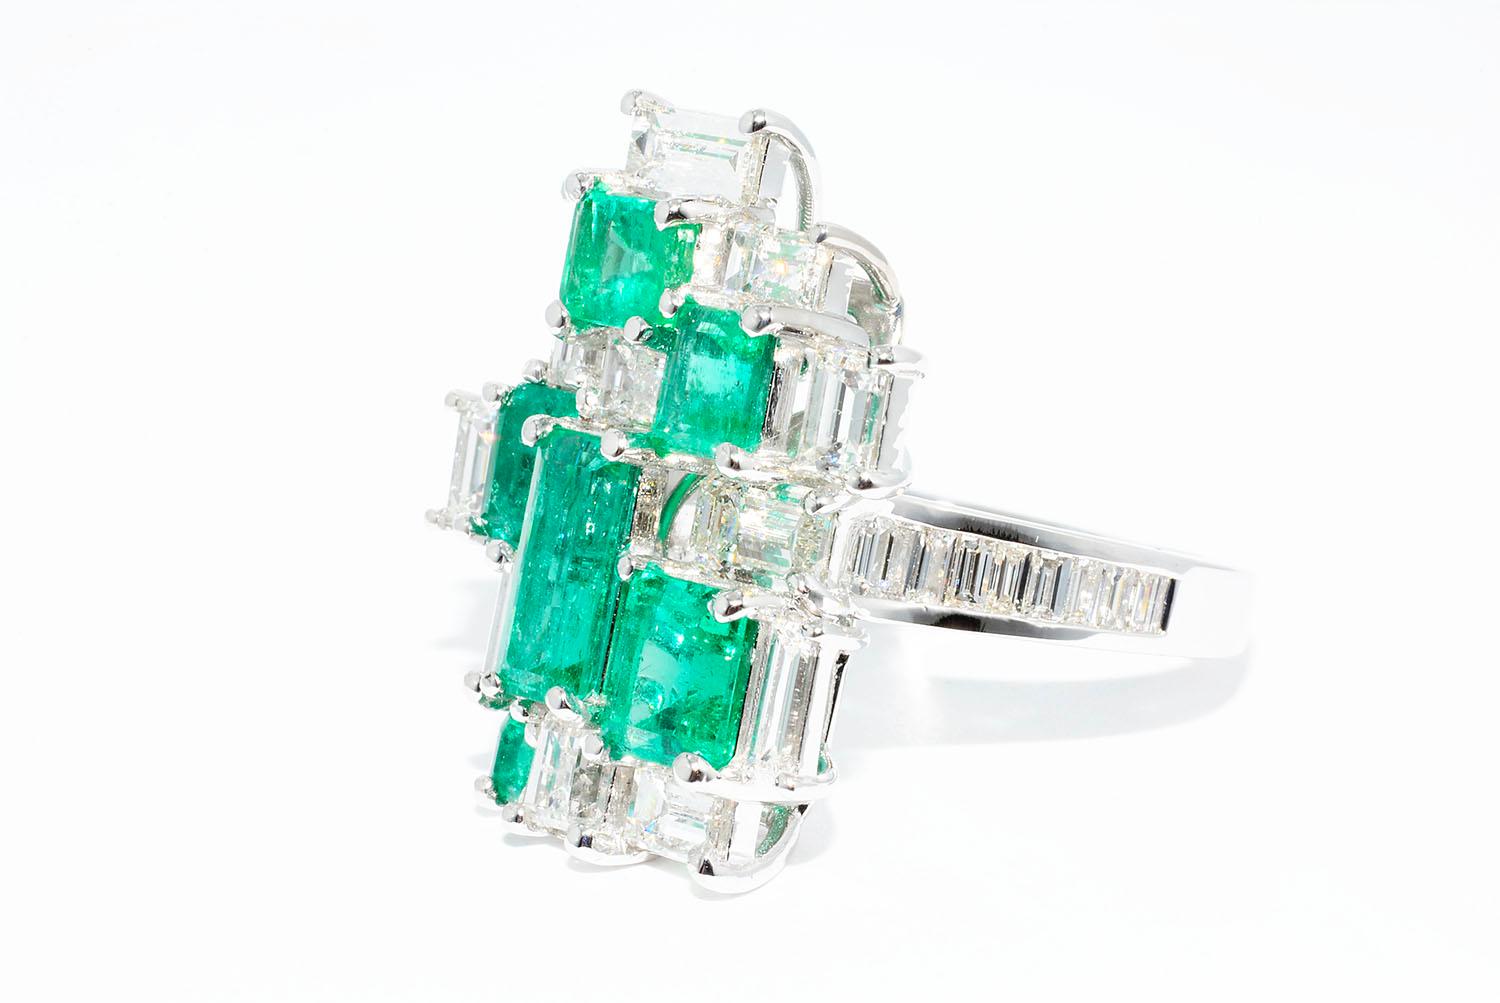 Colombian Emerald and Diamond Modern Cocktail Ring

Colombian Emeralds 6 pieces Emerald cuts 2.65 ct
Baguette Diamonds 29 pieces 2.50 ct  F VS1
18K White Gold
Finger Size 6.75
